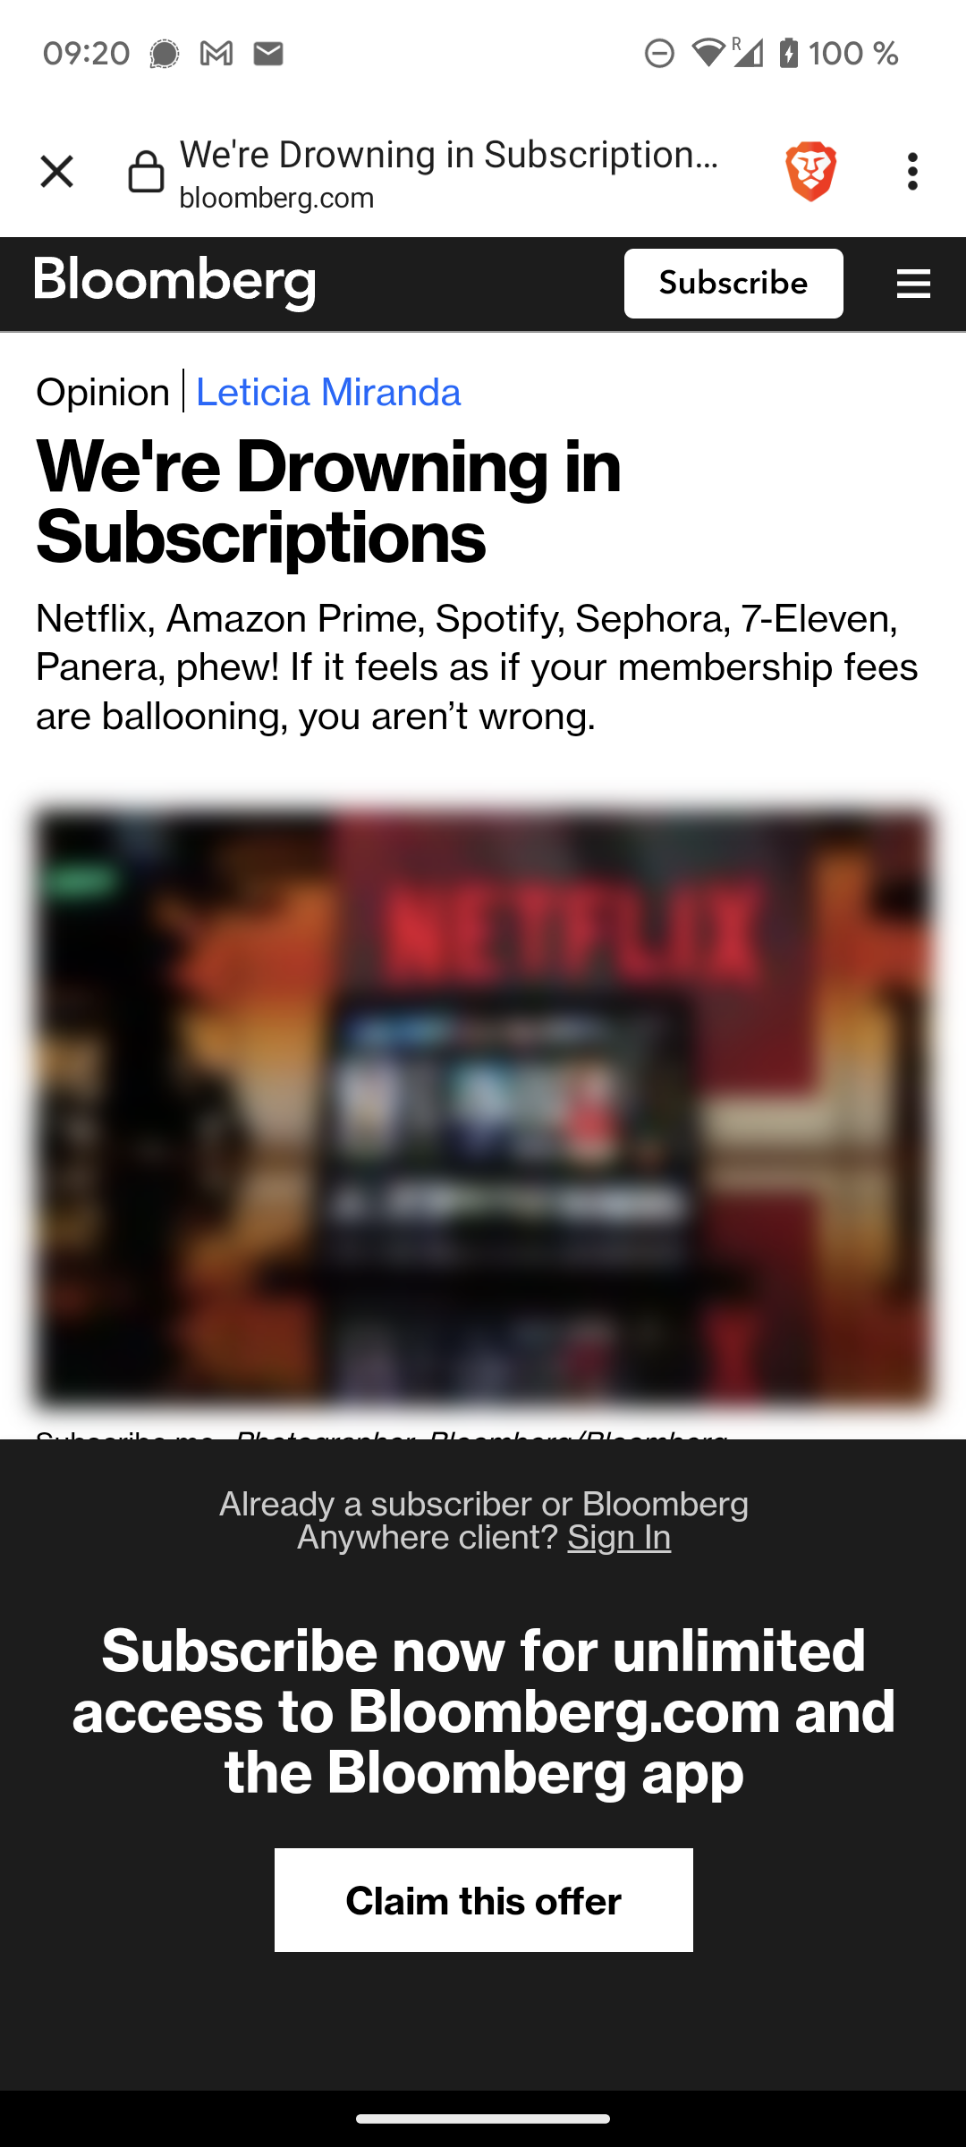 An article on Bloomberg named "We're Drowning in Subscriptions" locked behind a subscription paywall.